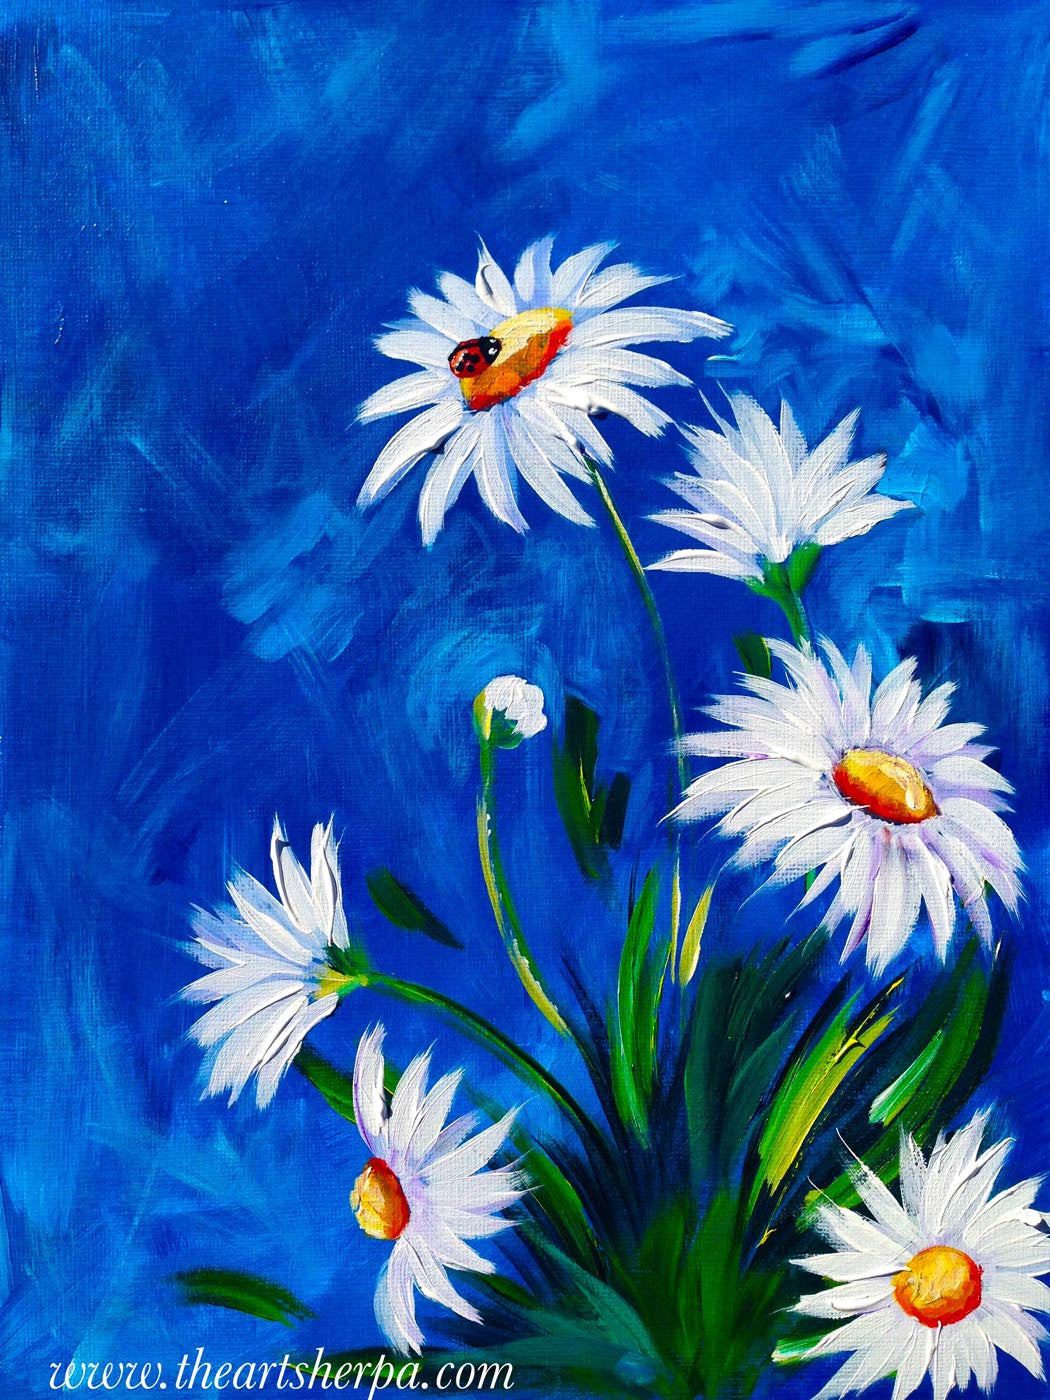 Oil Painting - White Flowers with Blue Background - Canvas Prints by Sam  Mitchell, Buy Posters, Frames, Canvas & Digital Art Prints